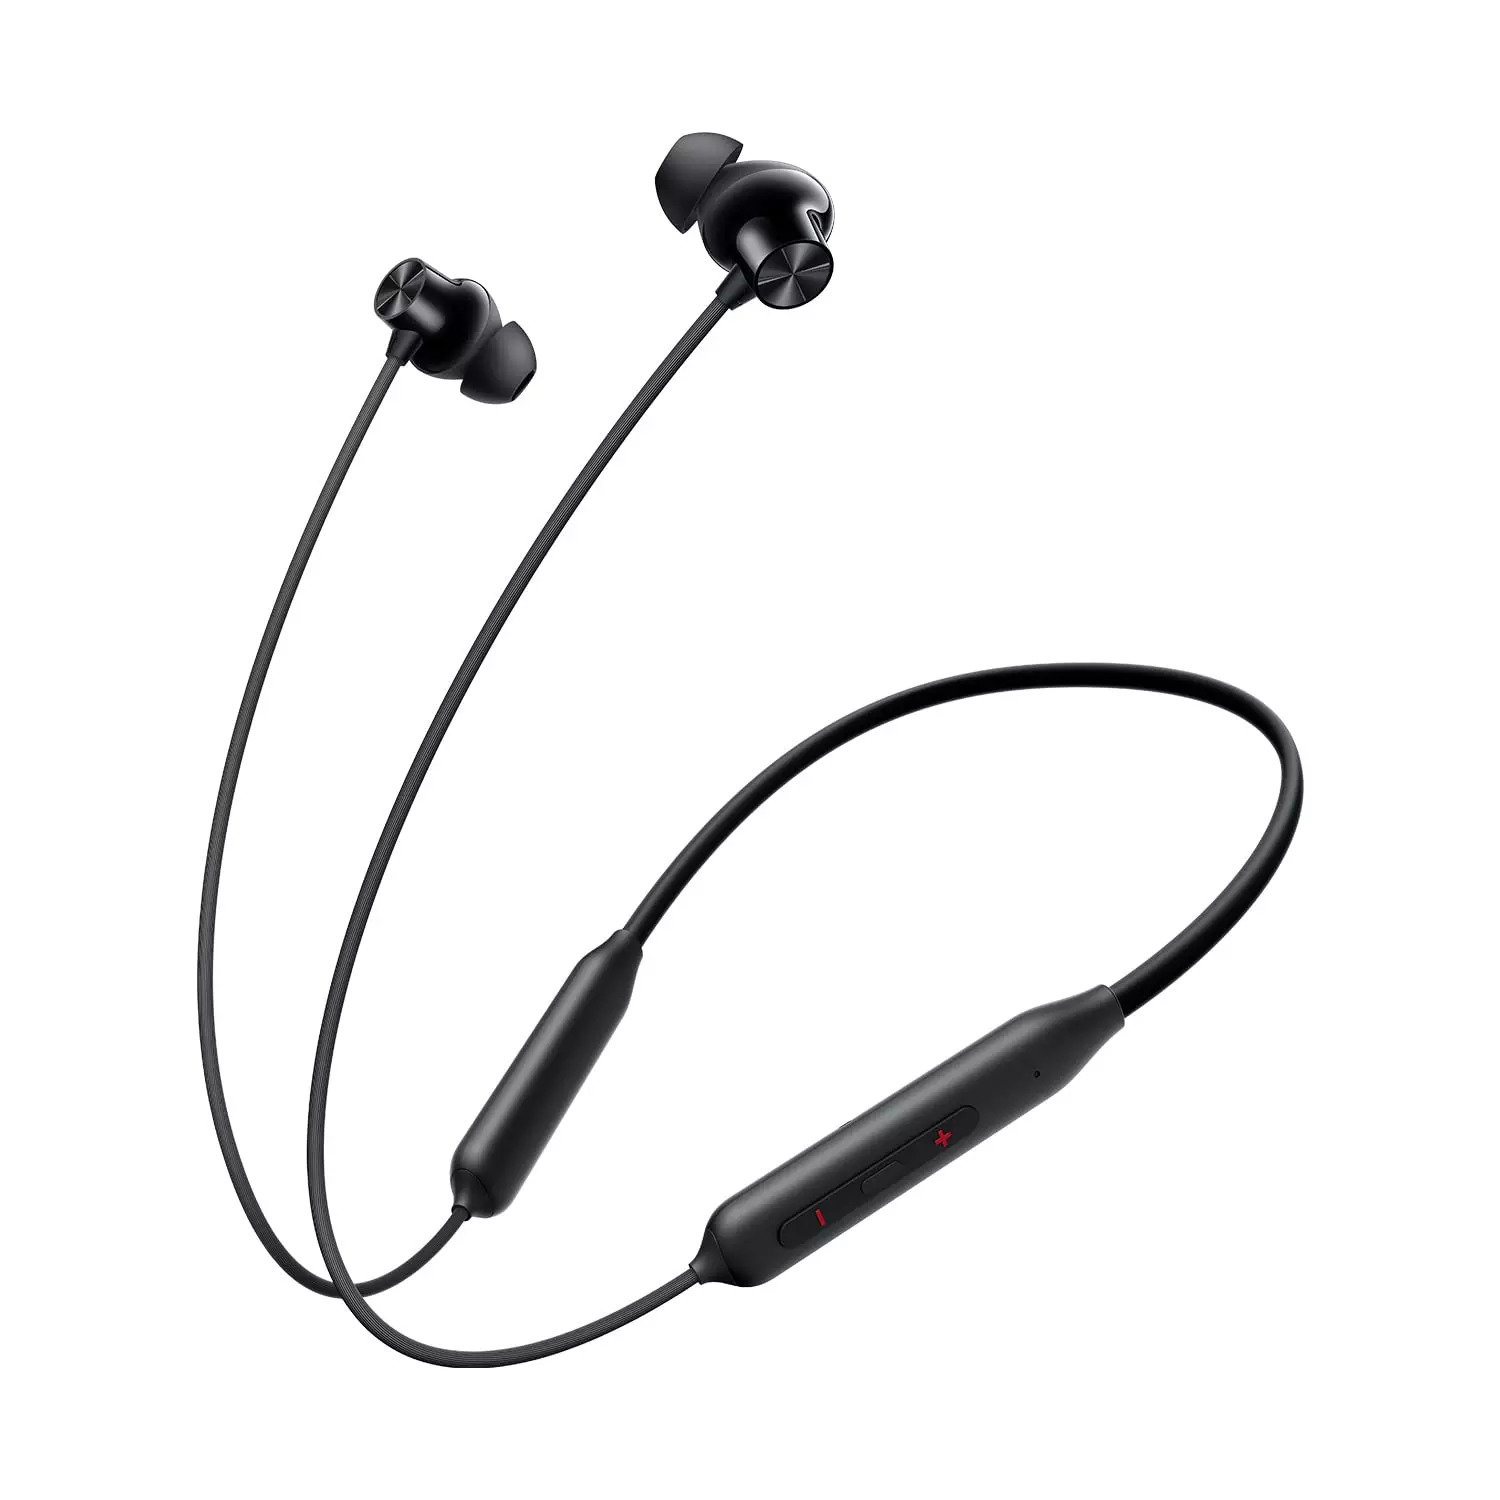 Bluetooth Headphones Wireless Earbuds Mini Earphones in-Ear Stereo Sound Noise Cancelling 2 Built-in Mic Charging Case Compatible Headsets Device Sport Ear Buds for Smartphones and Tablets 3 